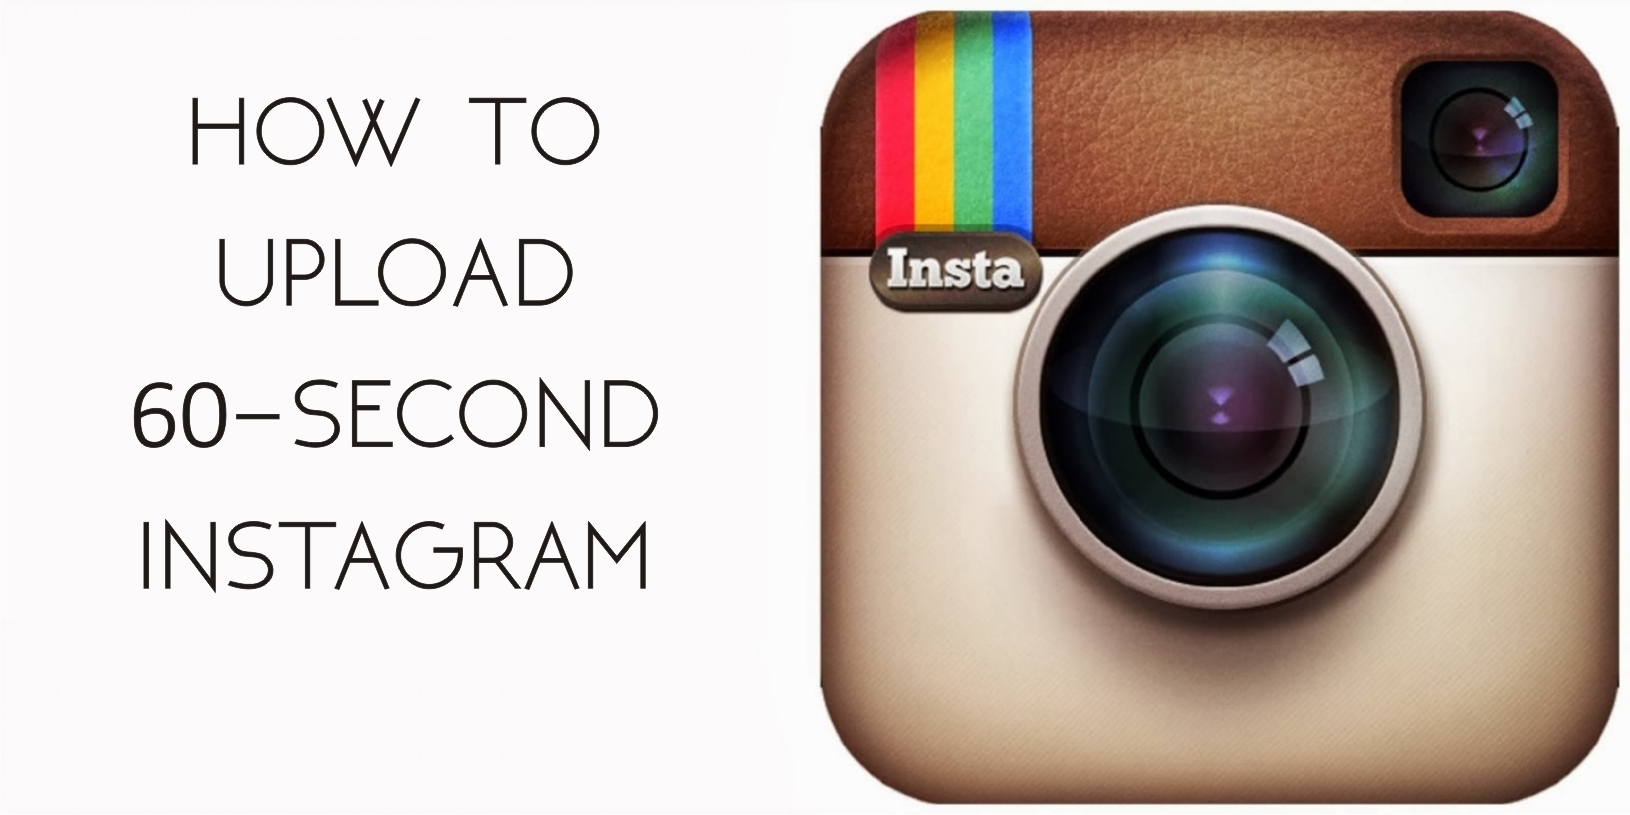 How to Upload 60-Second Instagram Videos